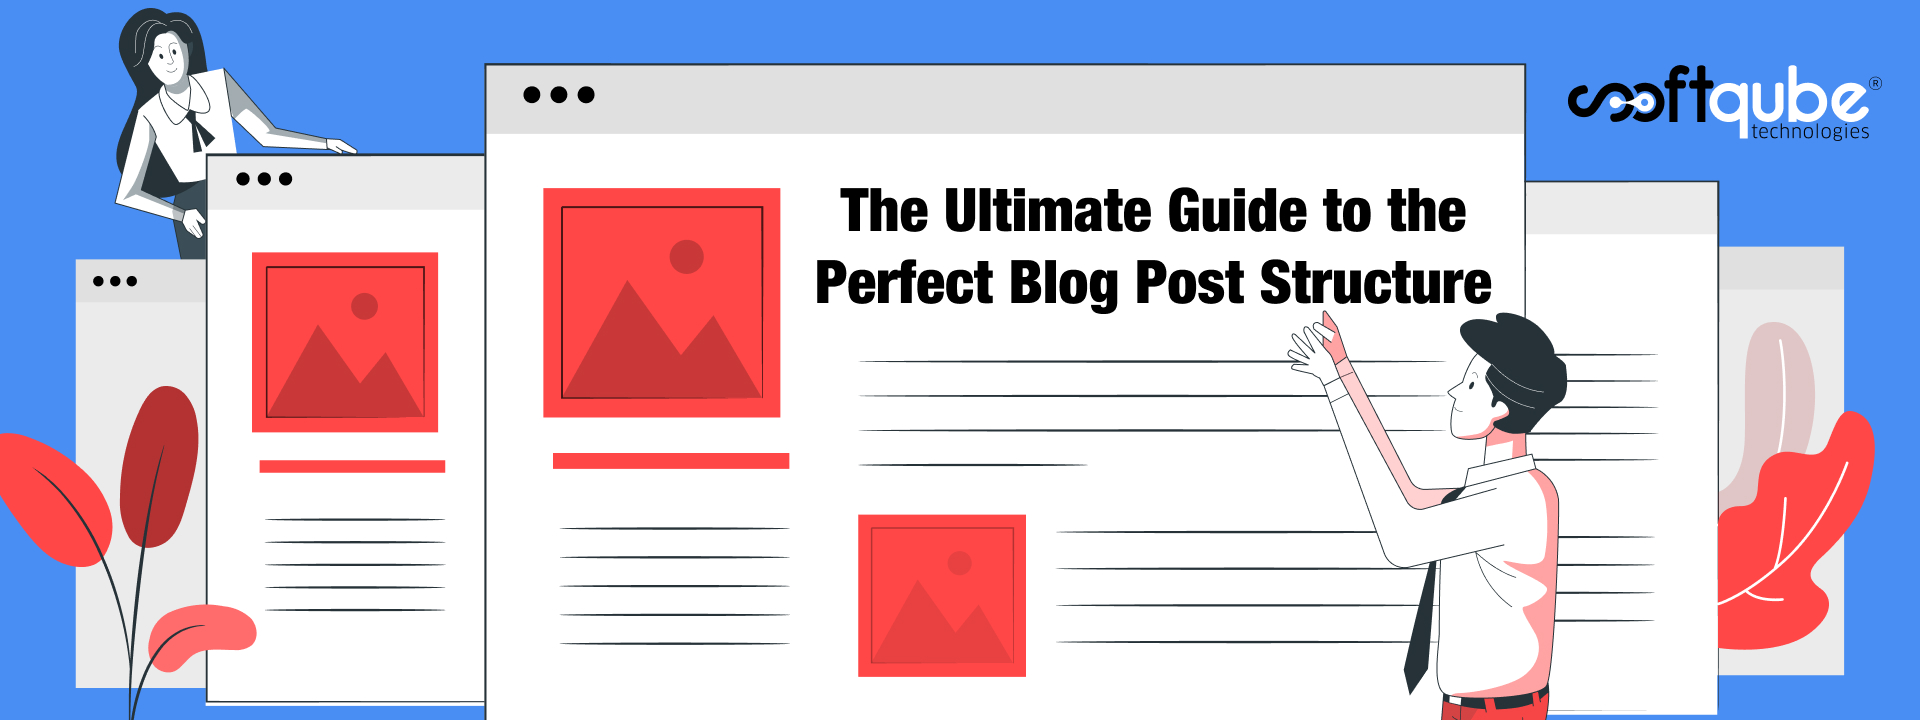 The Ultimate Guide to Perfect Blog Post Structure